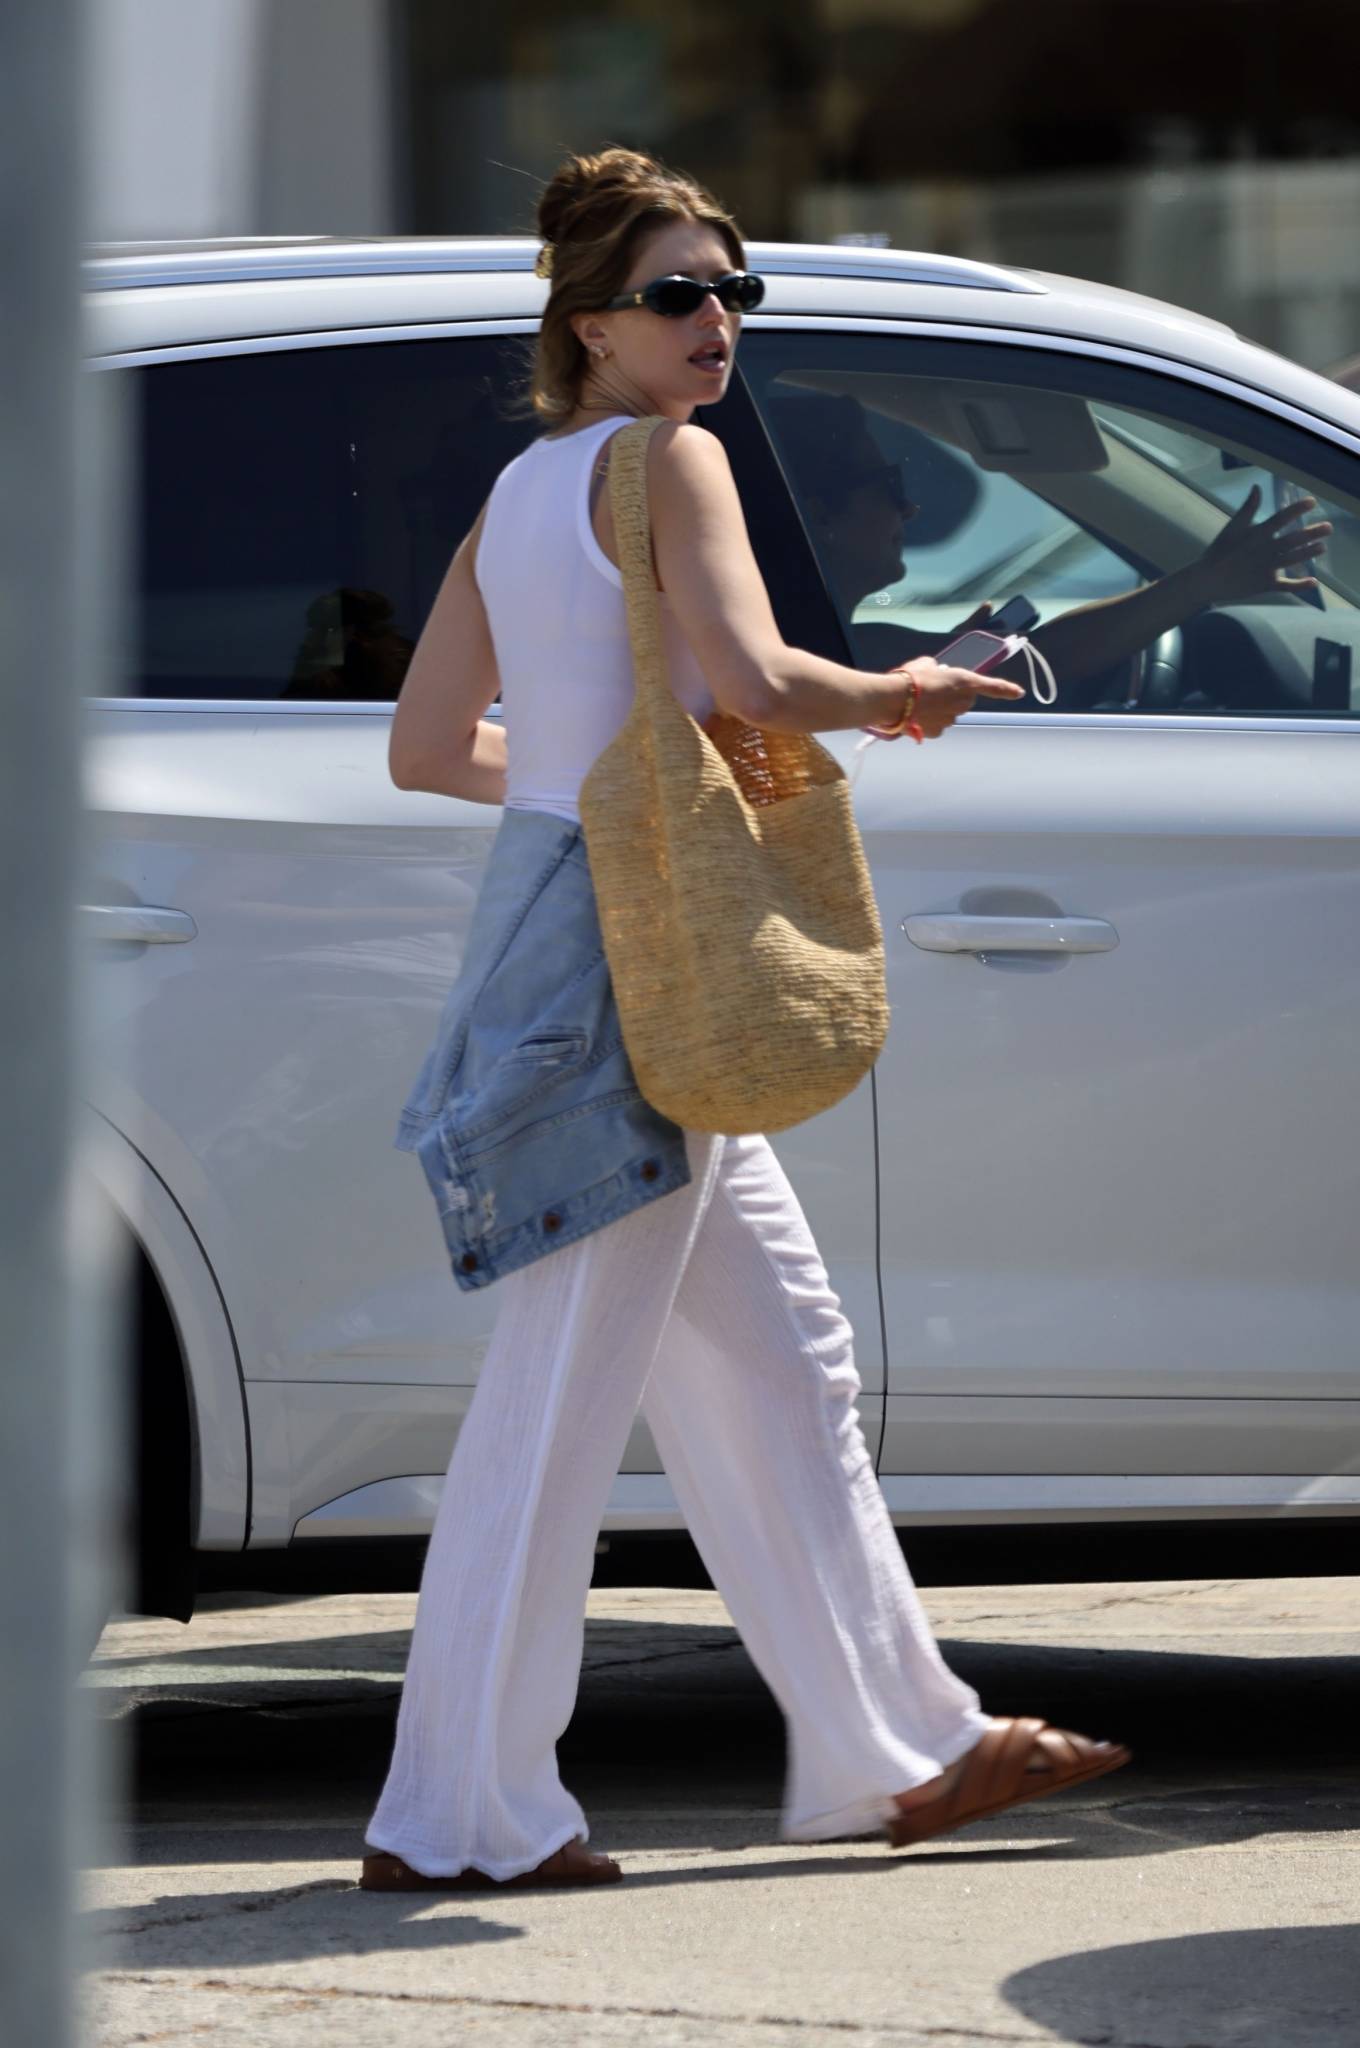 Katherine Schwarzenegger 2022 : Katherine Schwarzenegger – Steps out in all white in Los Angeles-04